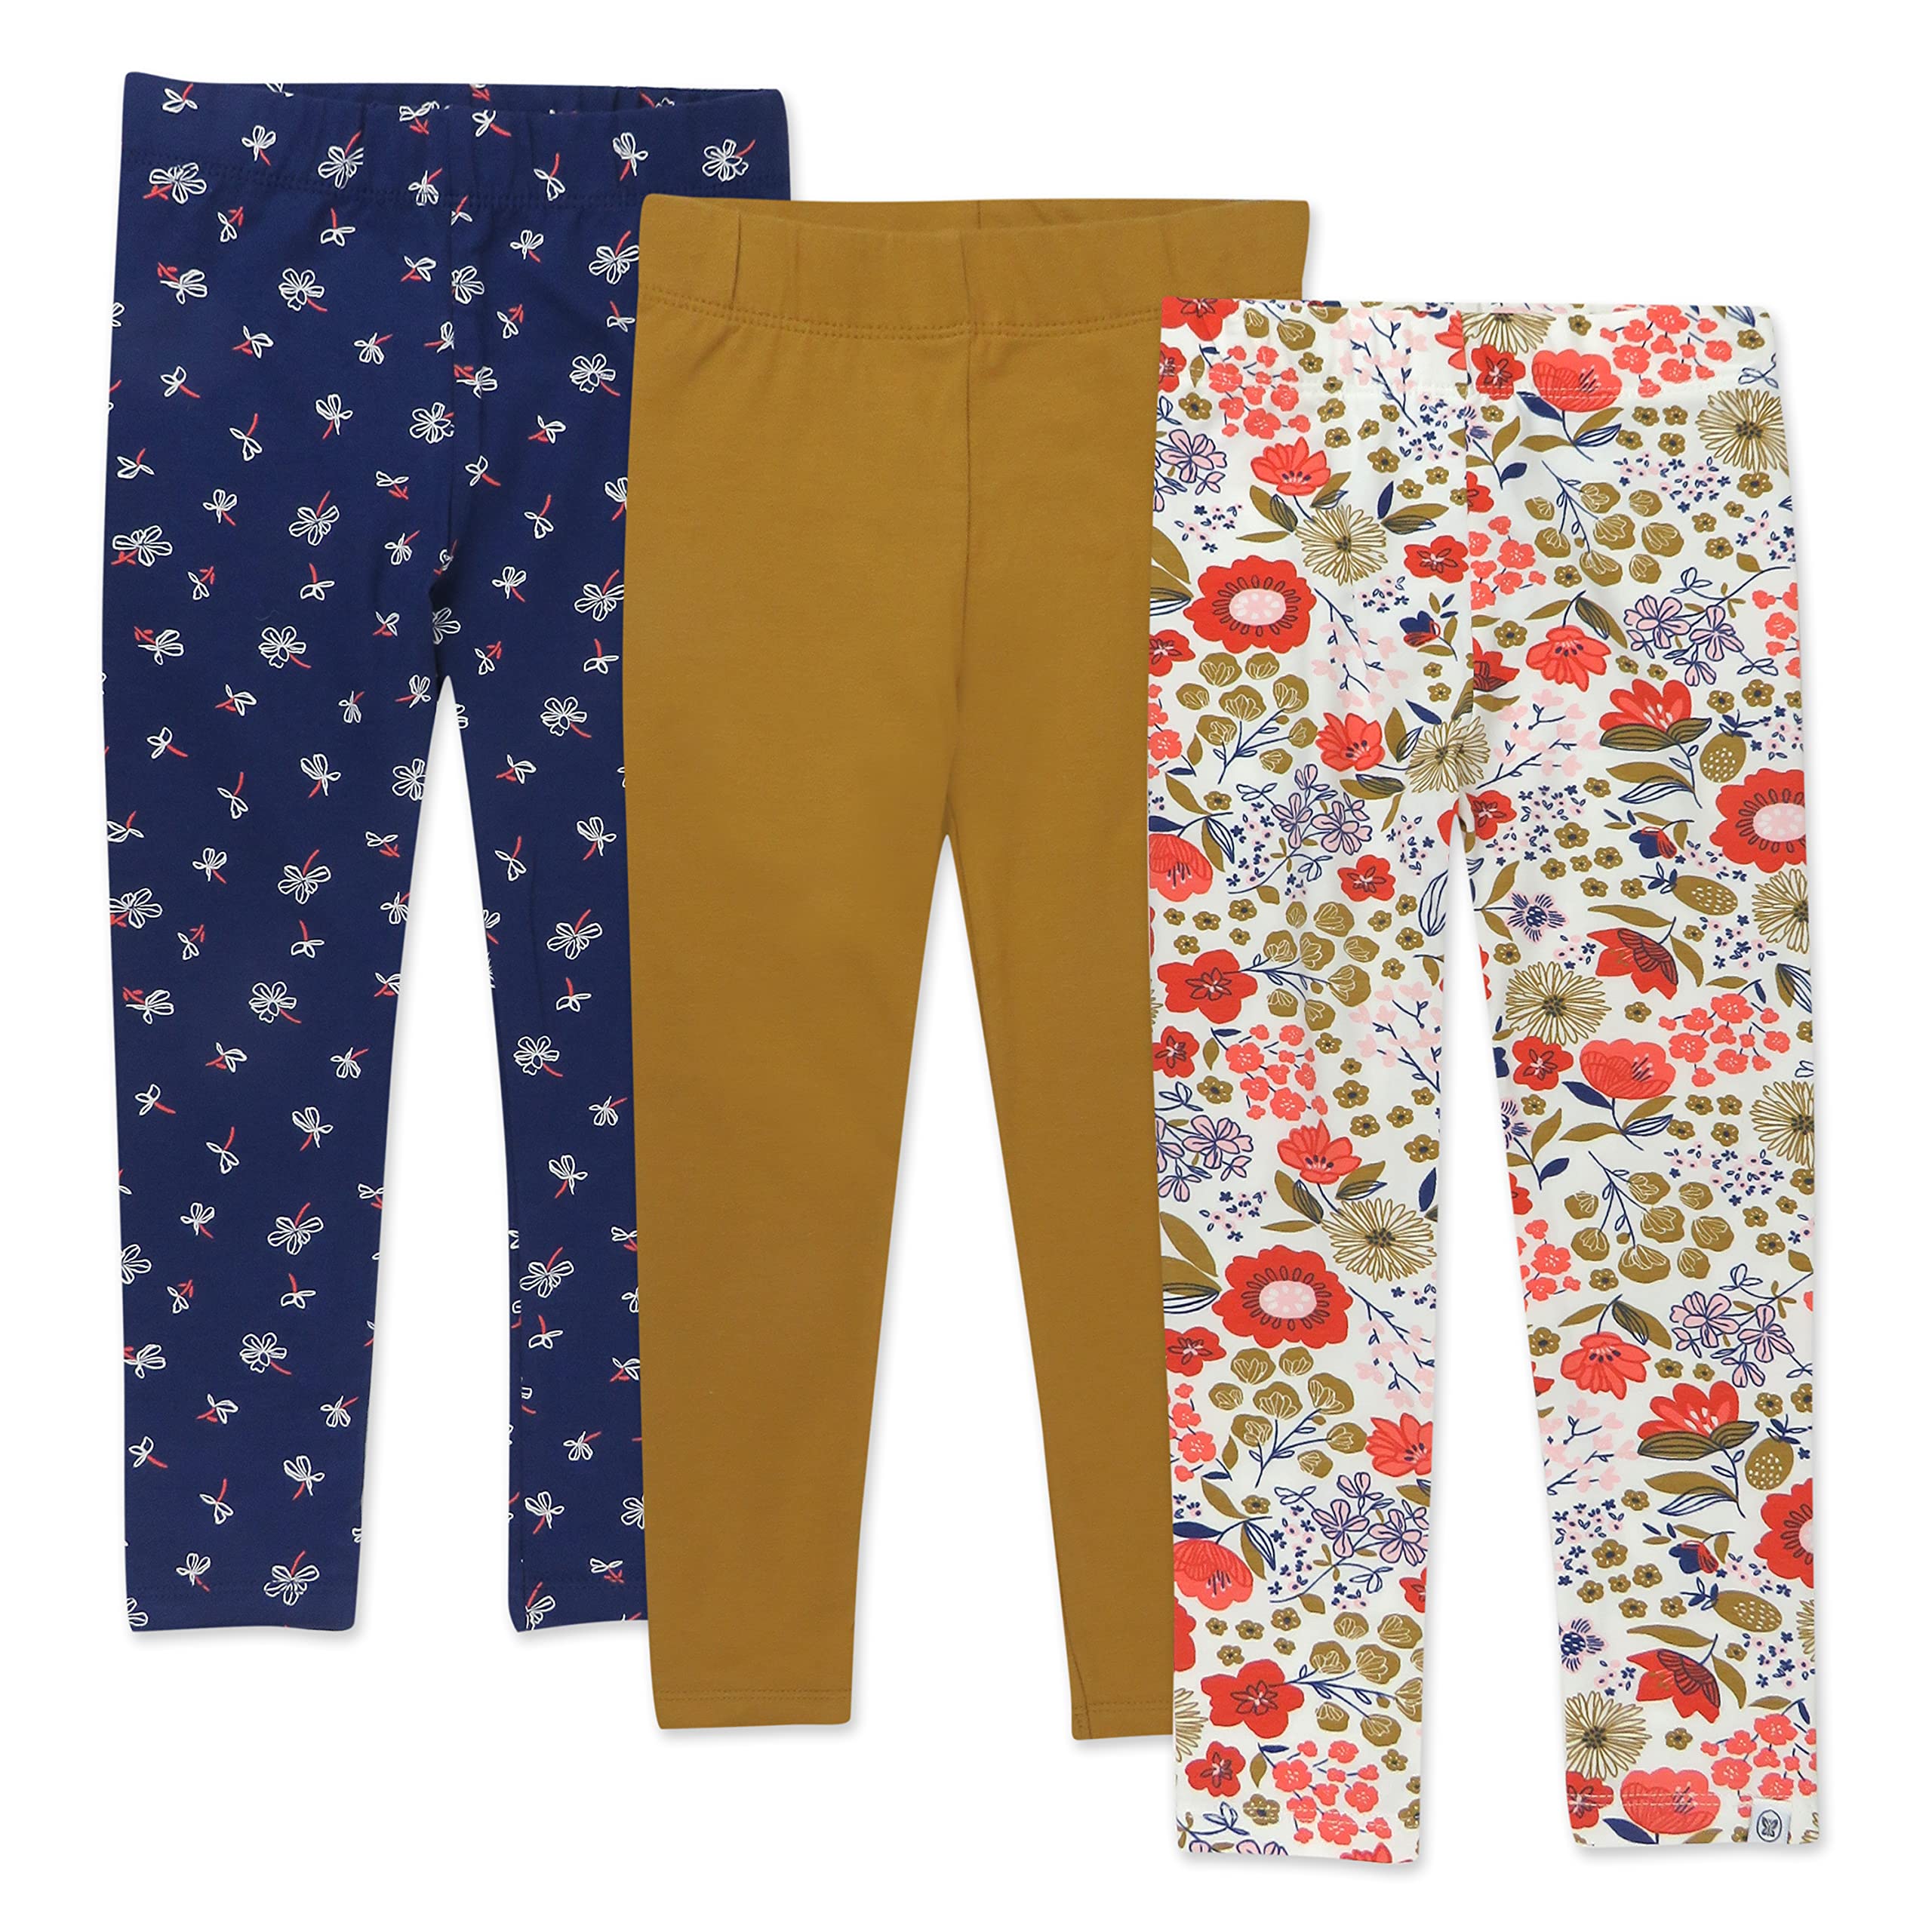 3-Pack HonestBaby Kids' Organic Cotton Leggings (4T, Copper Fields Floral Ivory) $8.10 + Free Shipping w/ Prime or on $25+